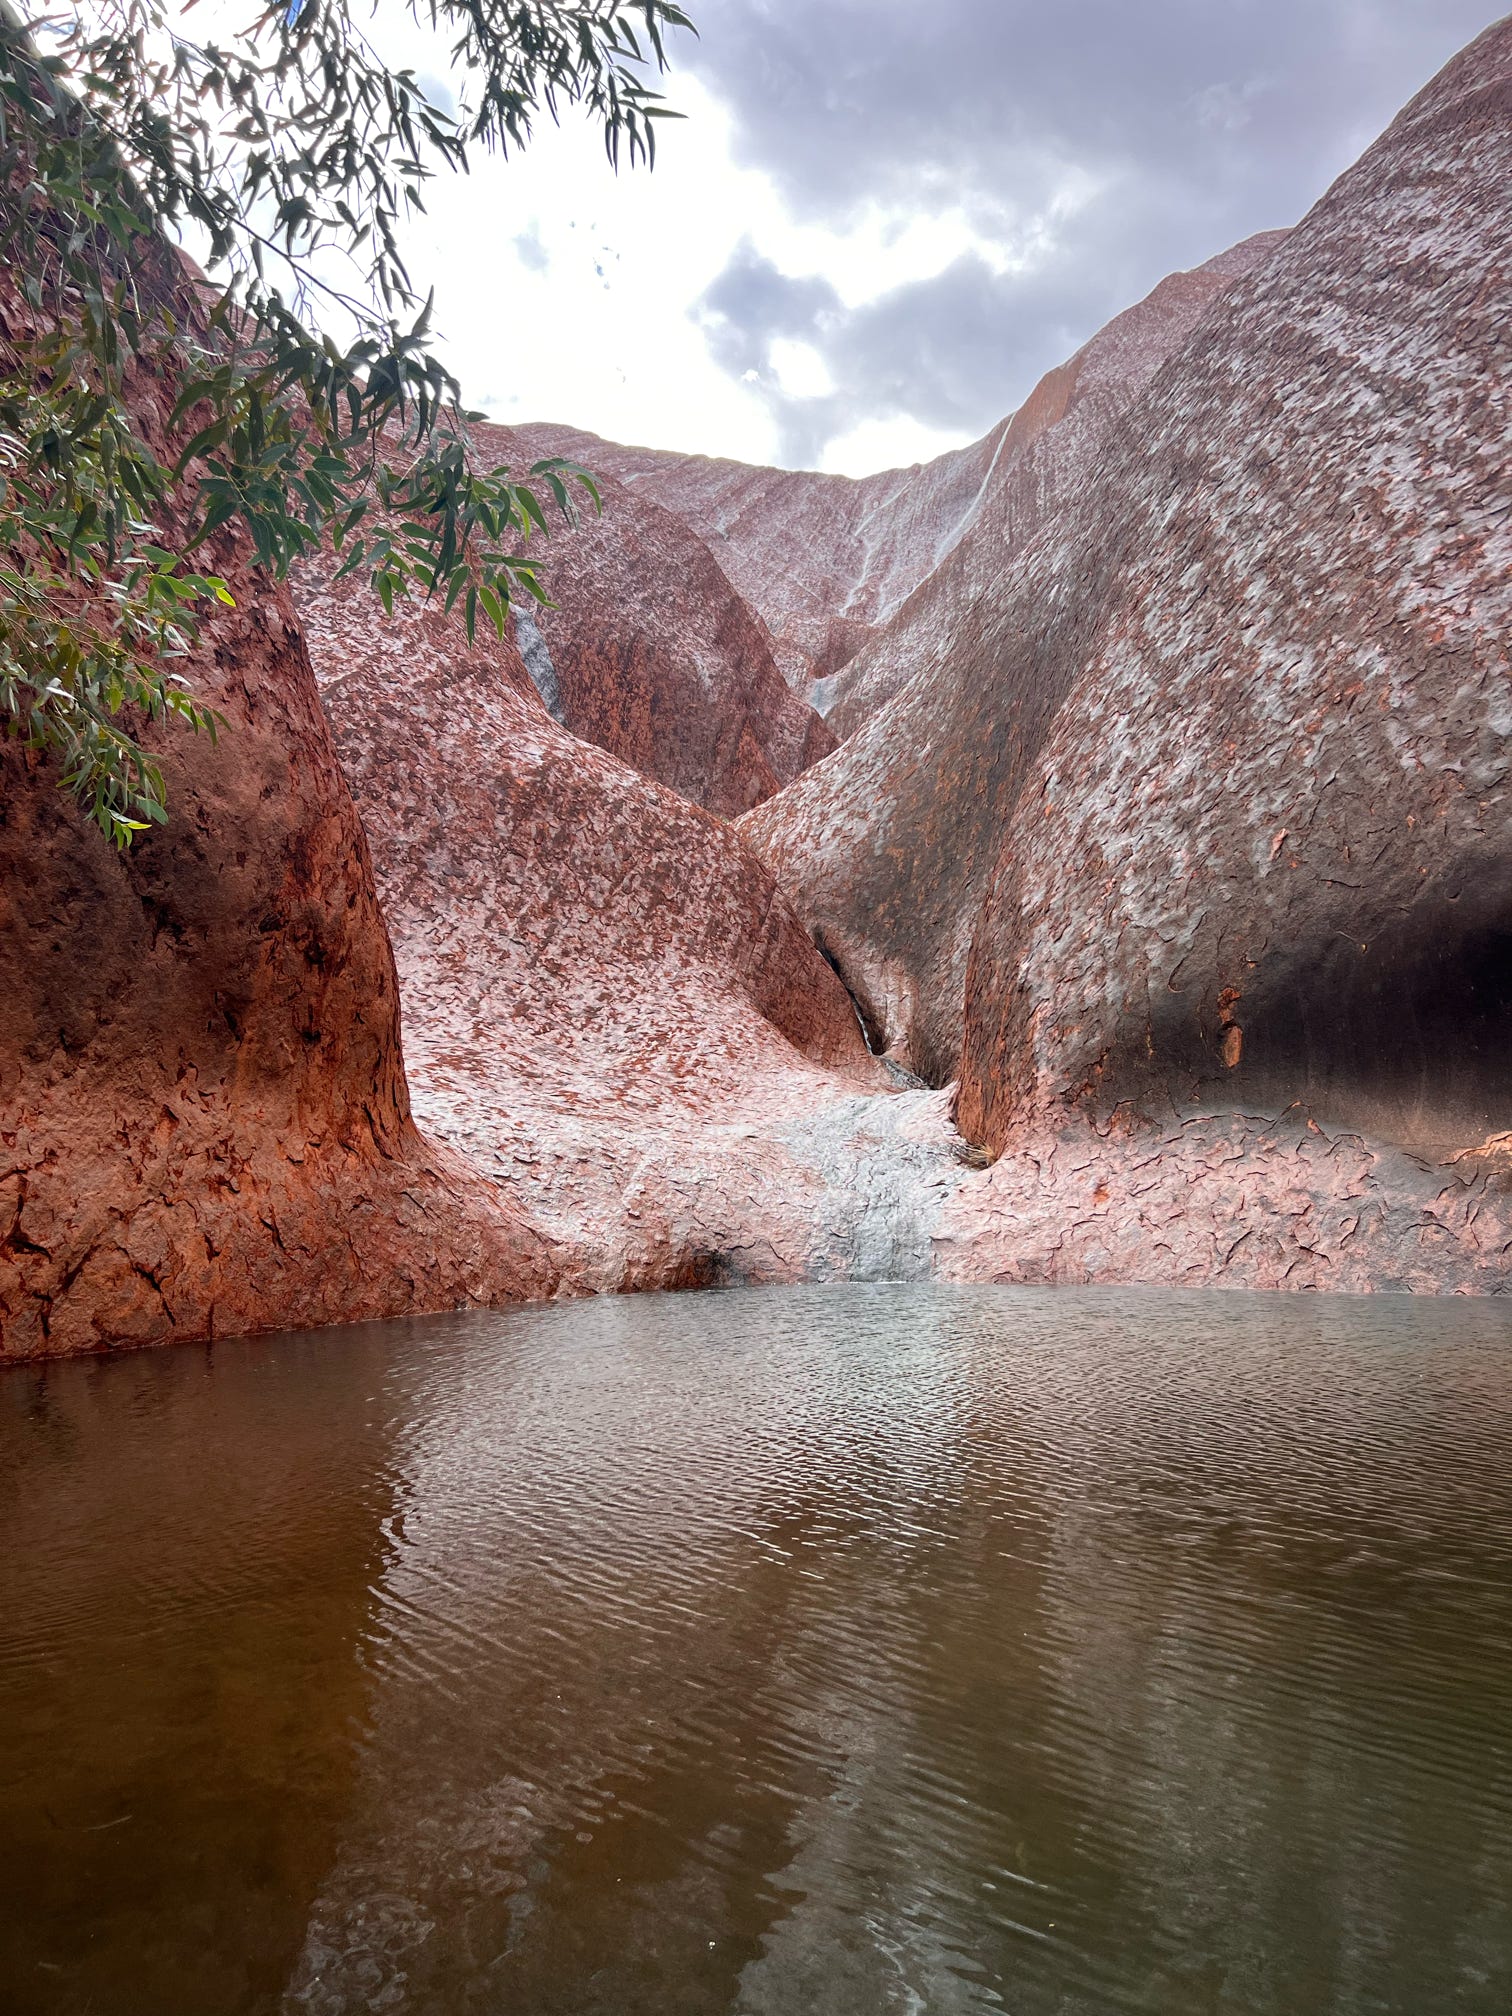 A serene waterhole at the base of Uluru in Central Australia, capturing the natural beauty and tranquility of the outback landscape.